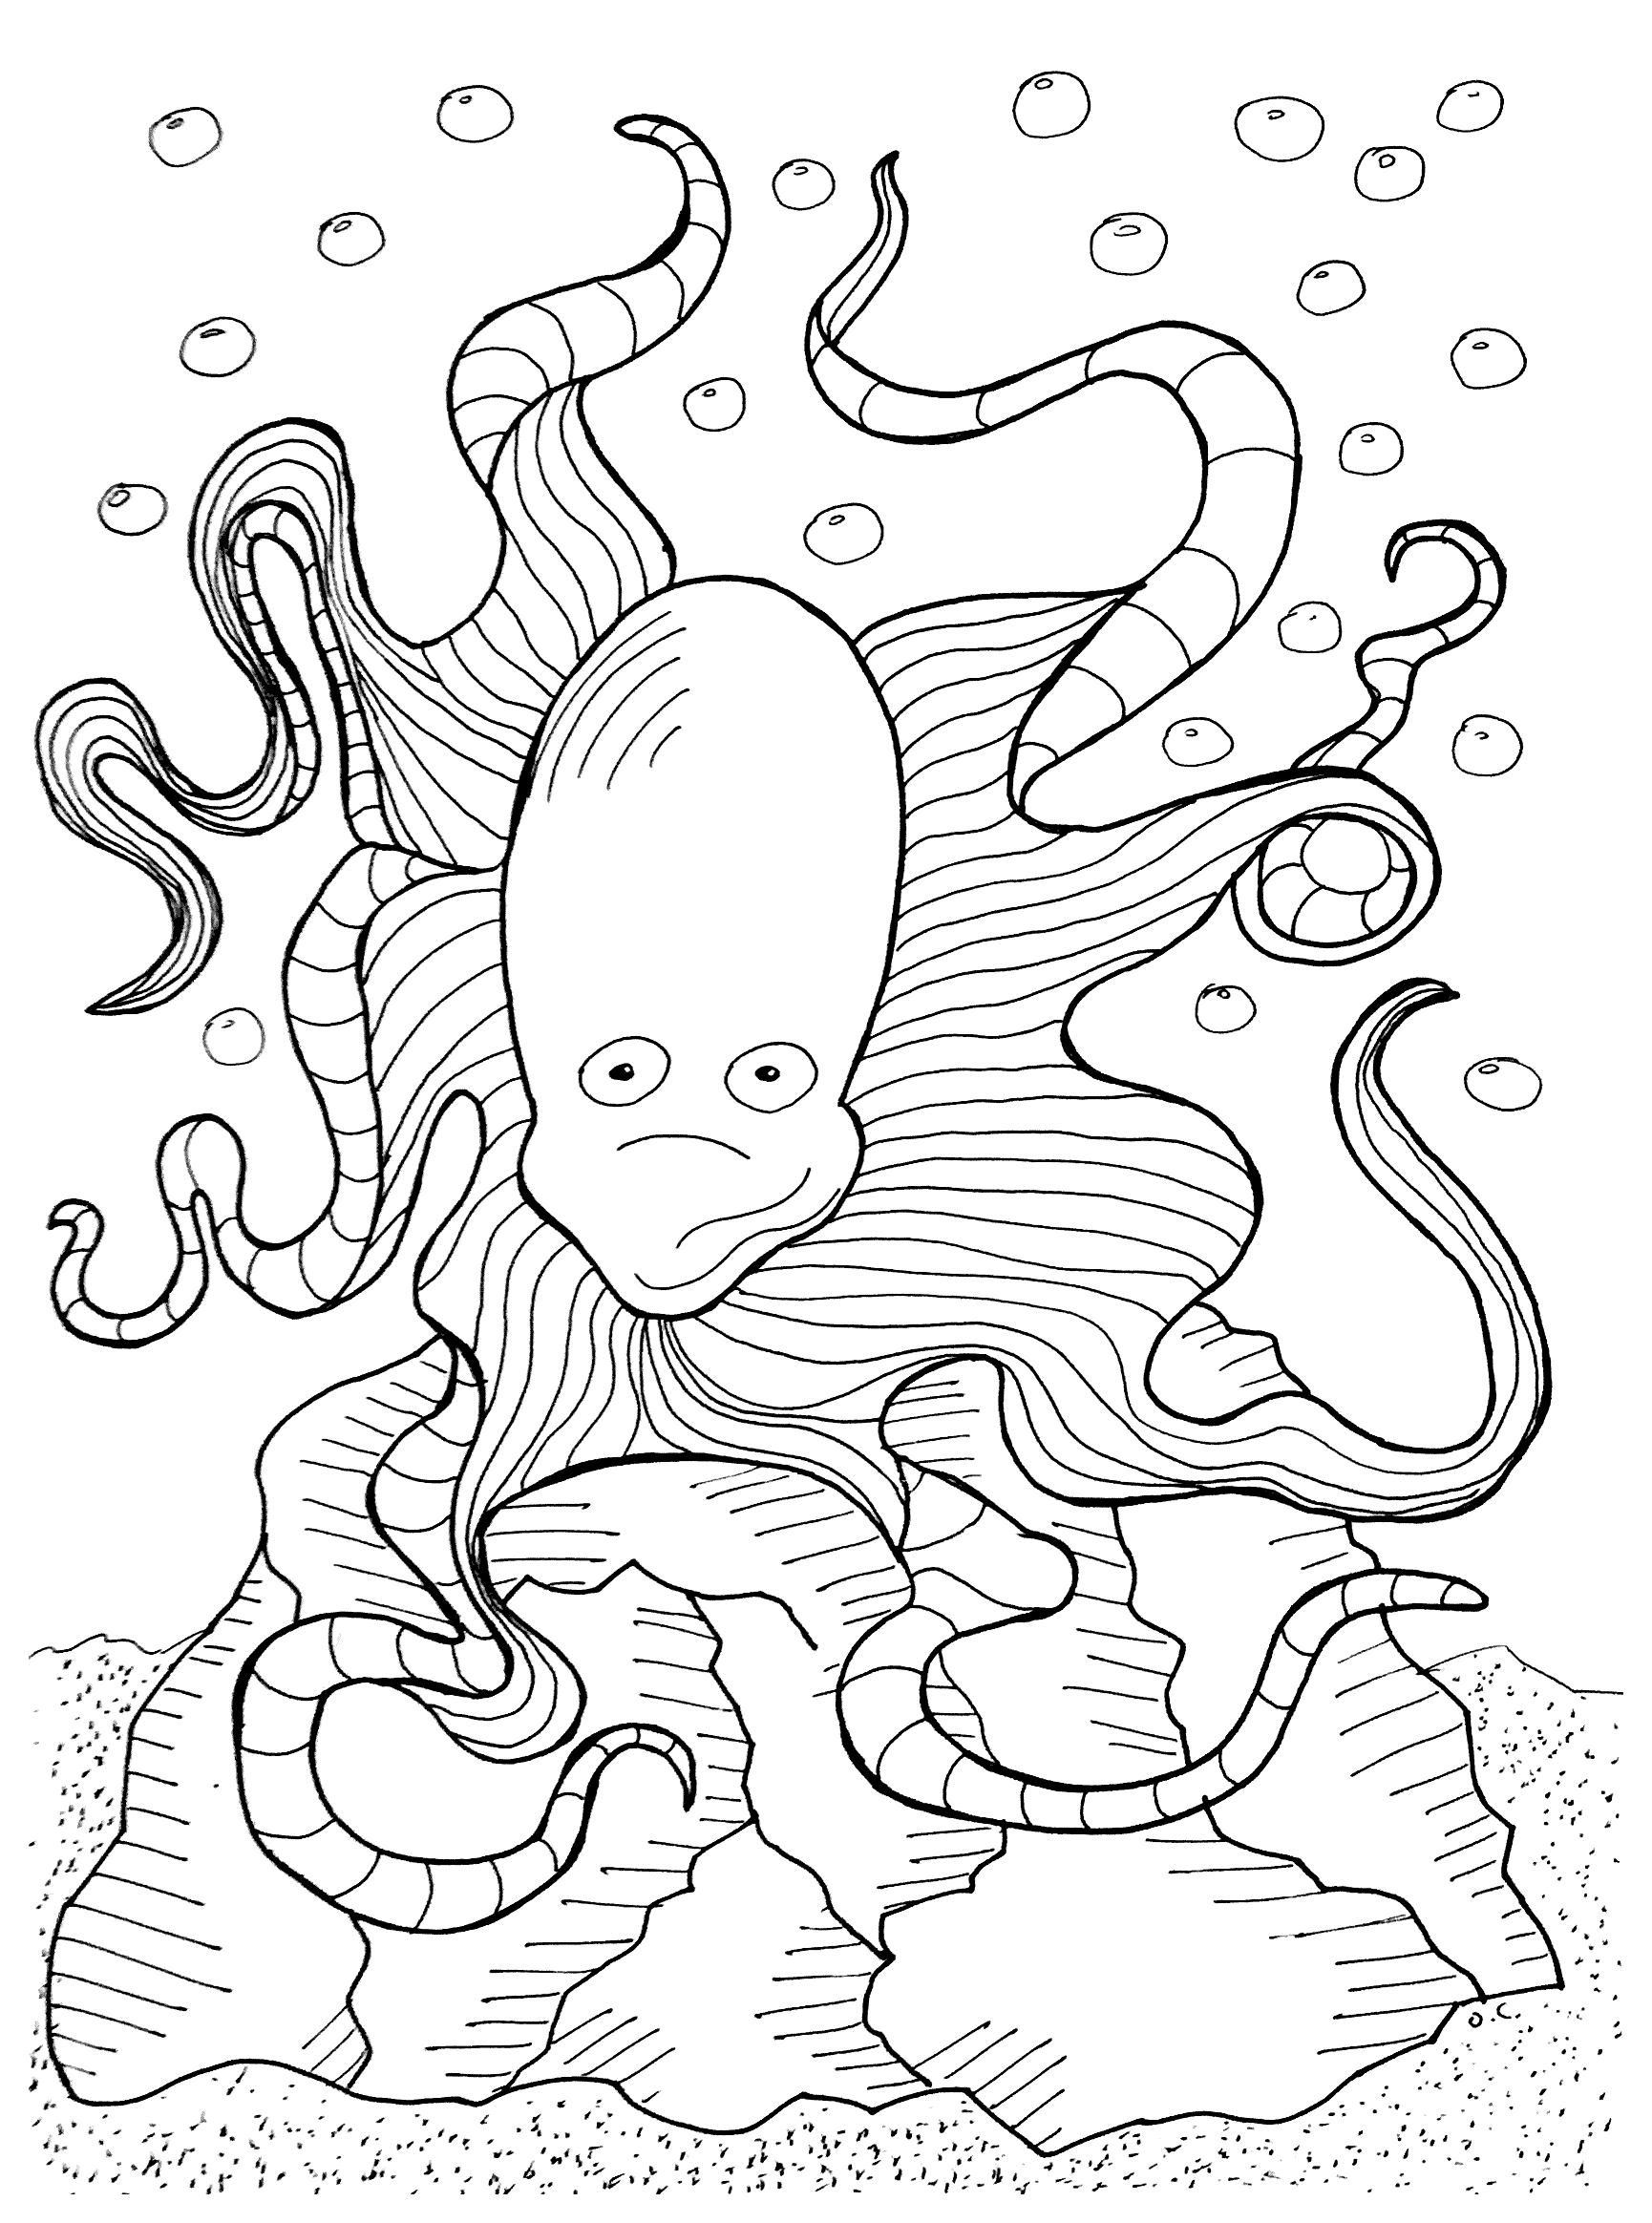 A funny octopus, by Olivier